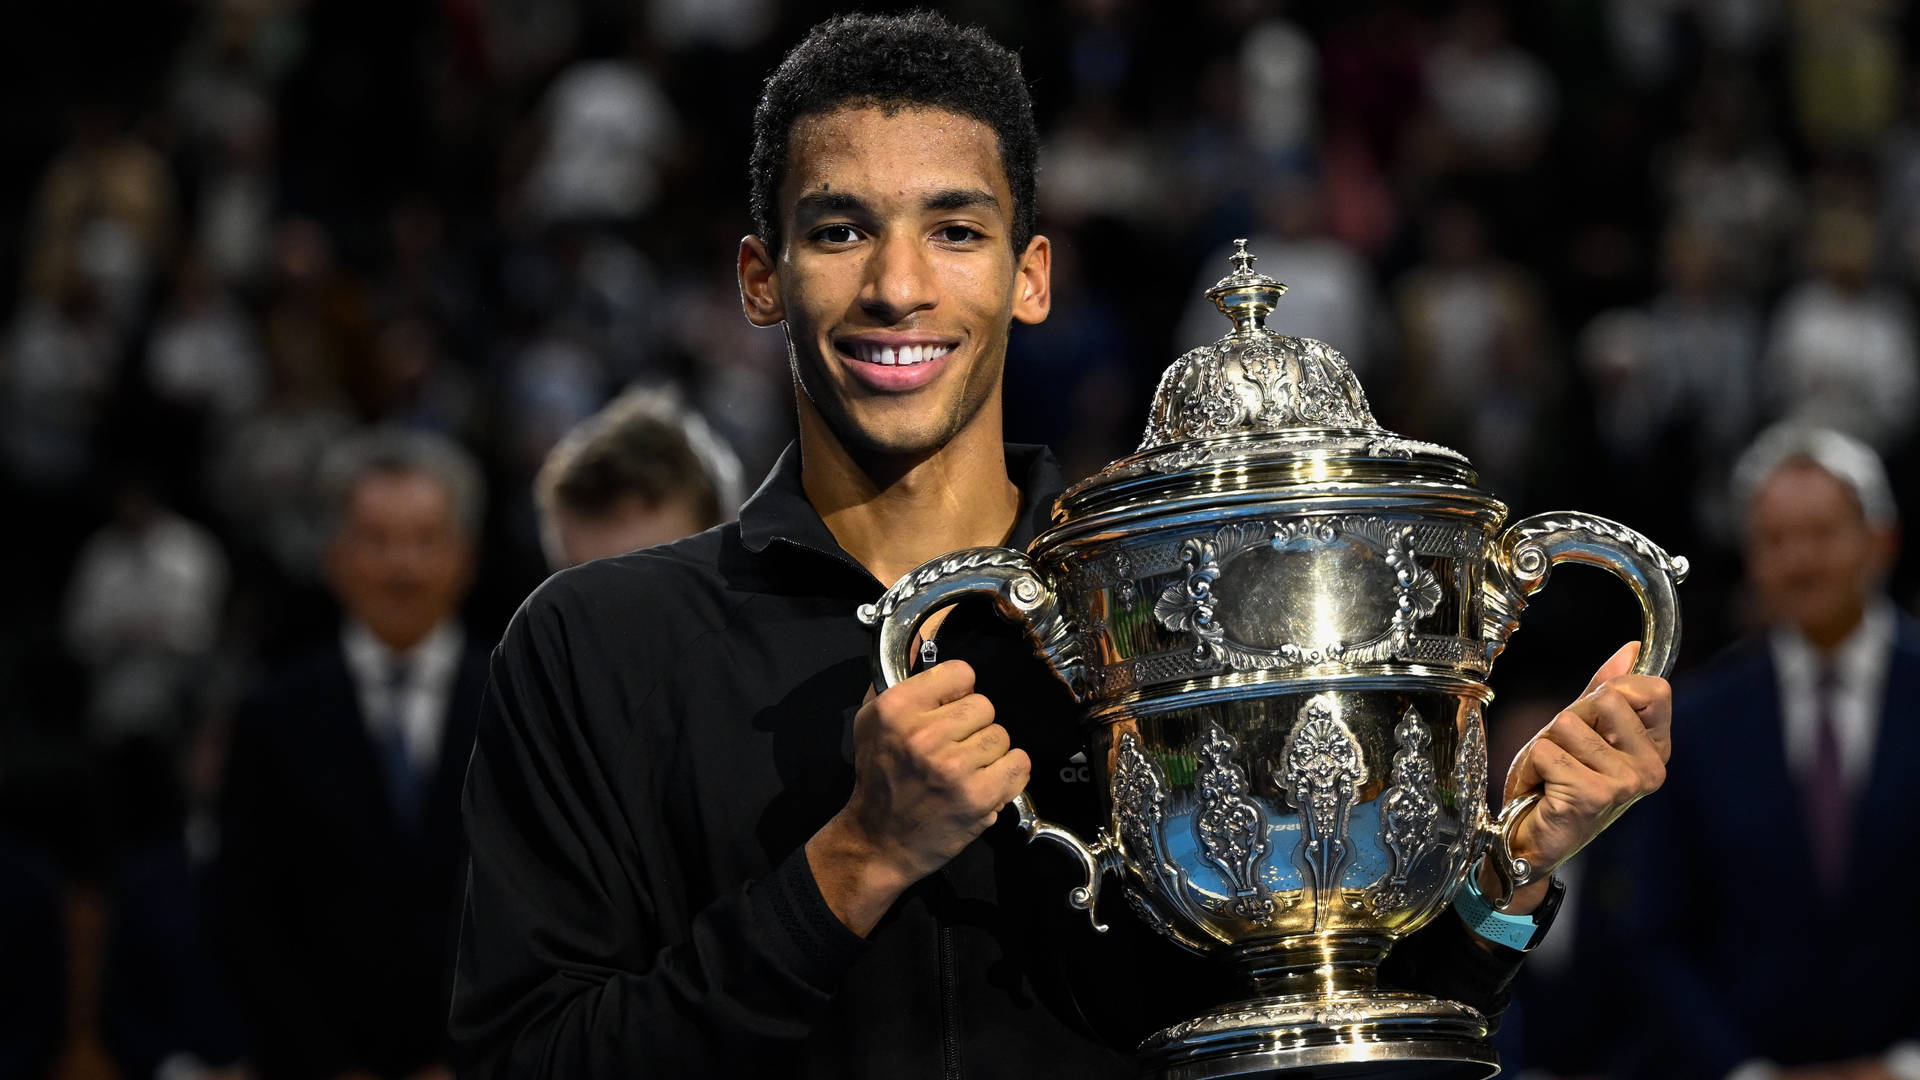 Felix Auger-aliassime Triumphantly Lifting A Trophy Background